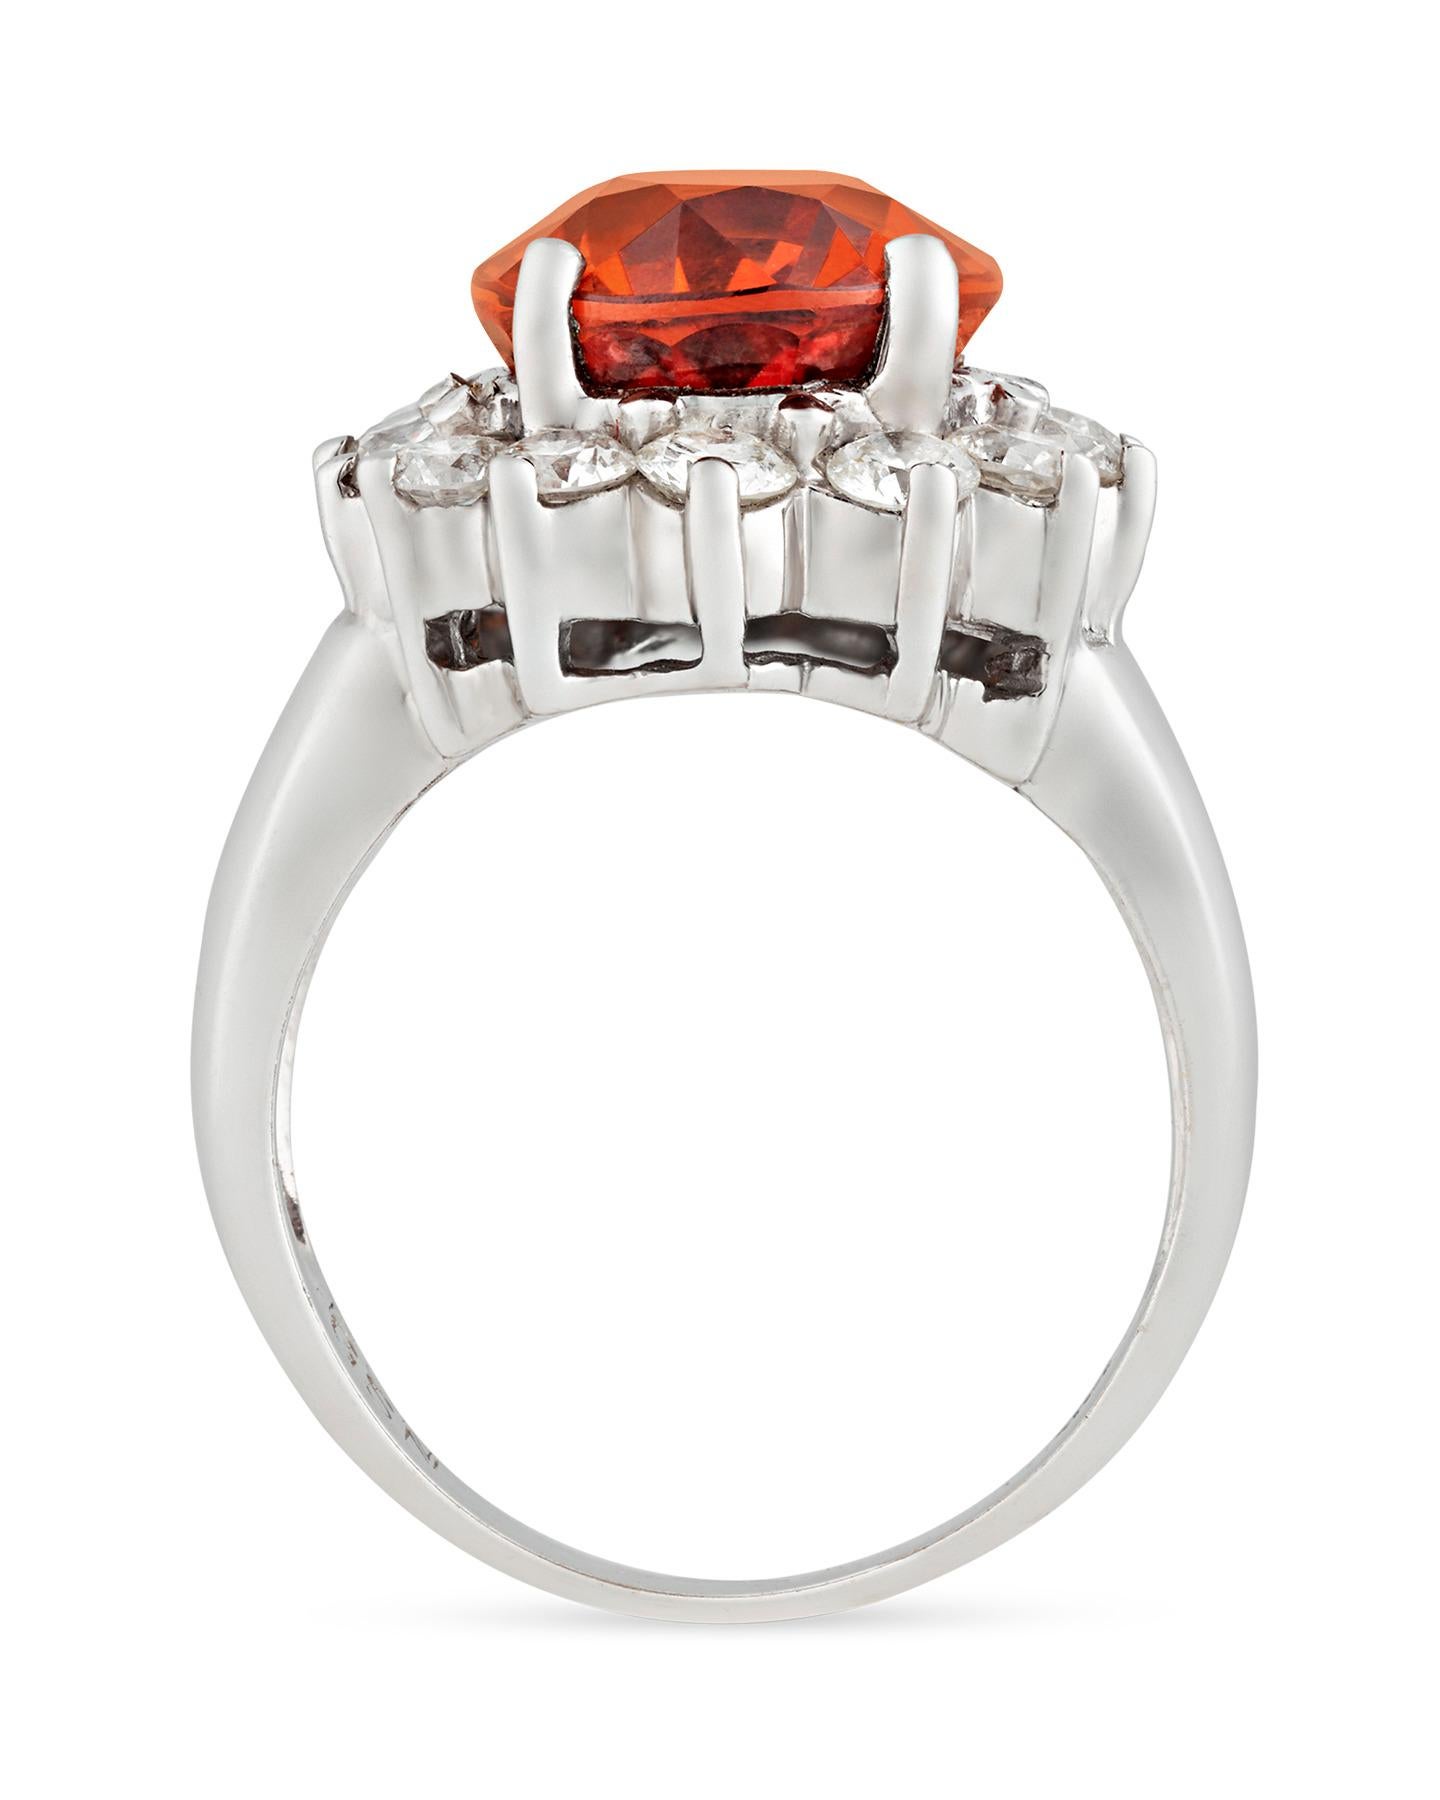 Glowing with an incomparable radiance, this incredibly rare 5.50-carat spessartite garnet displays the opulent 